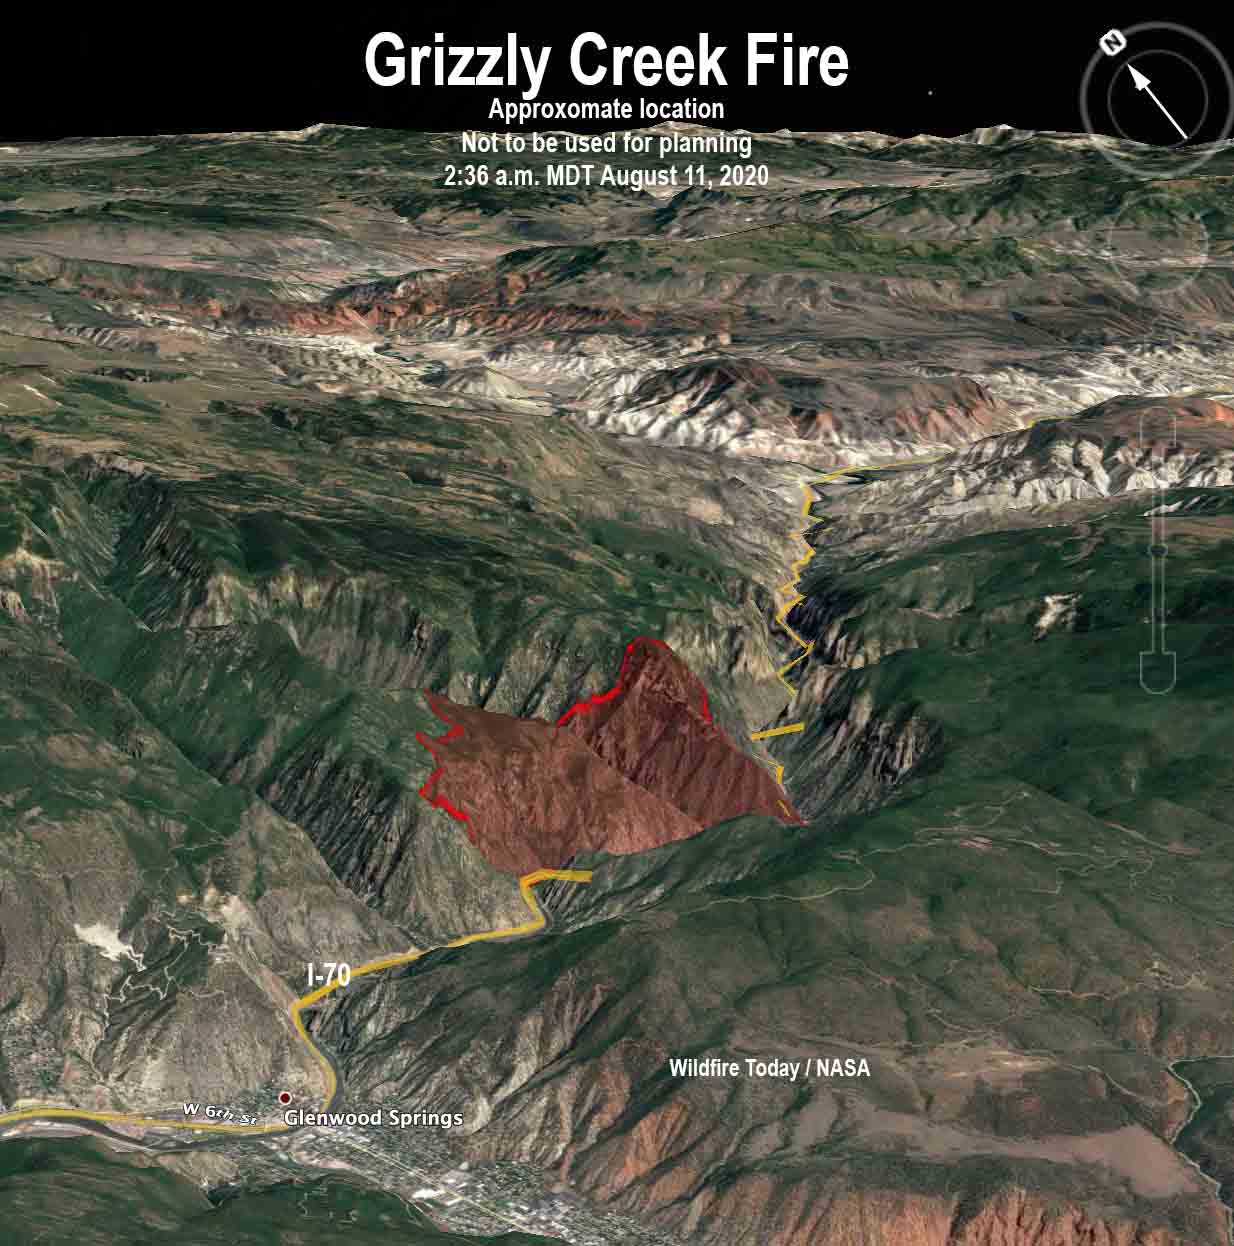 Grizzly Creek Fire closes I-70 near Glenwood Springs, CO - Wildfire Today